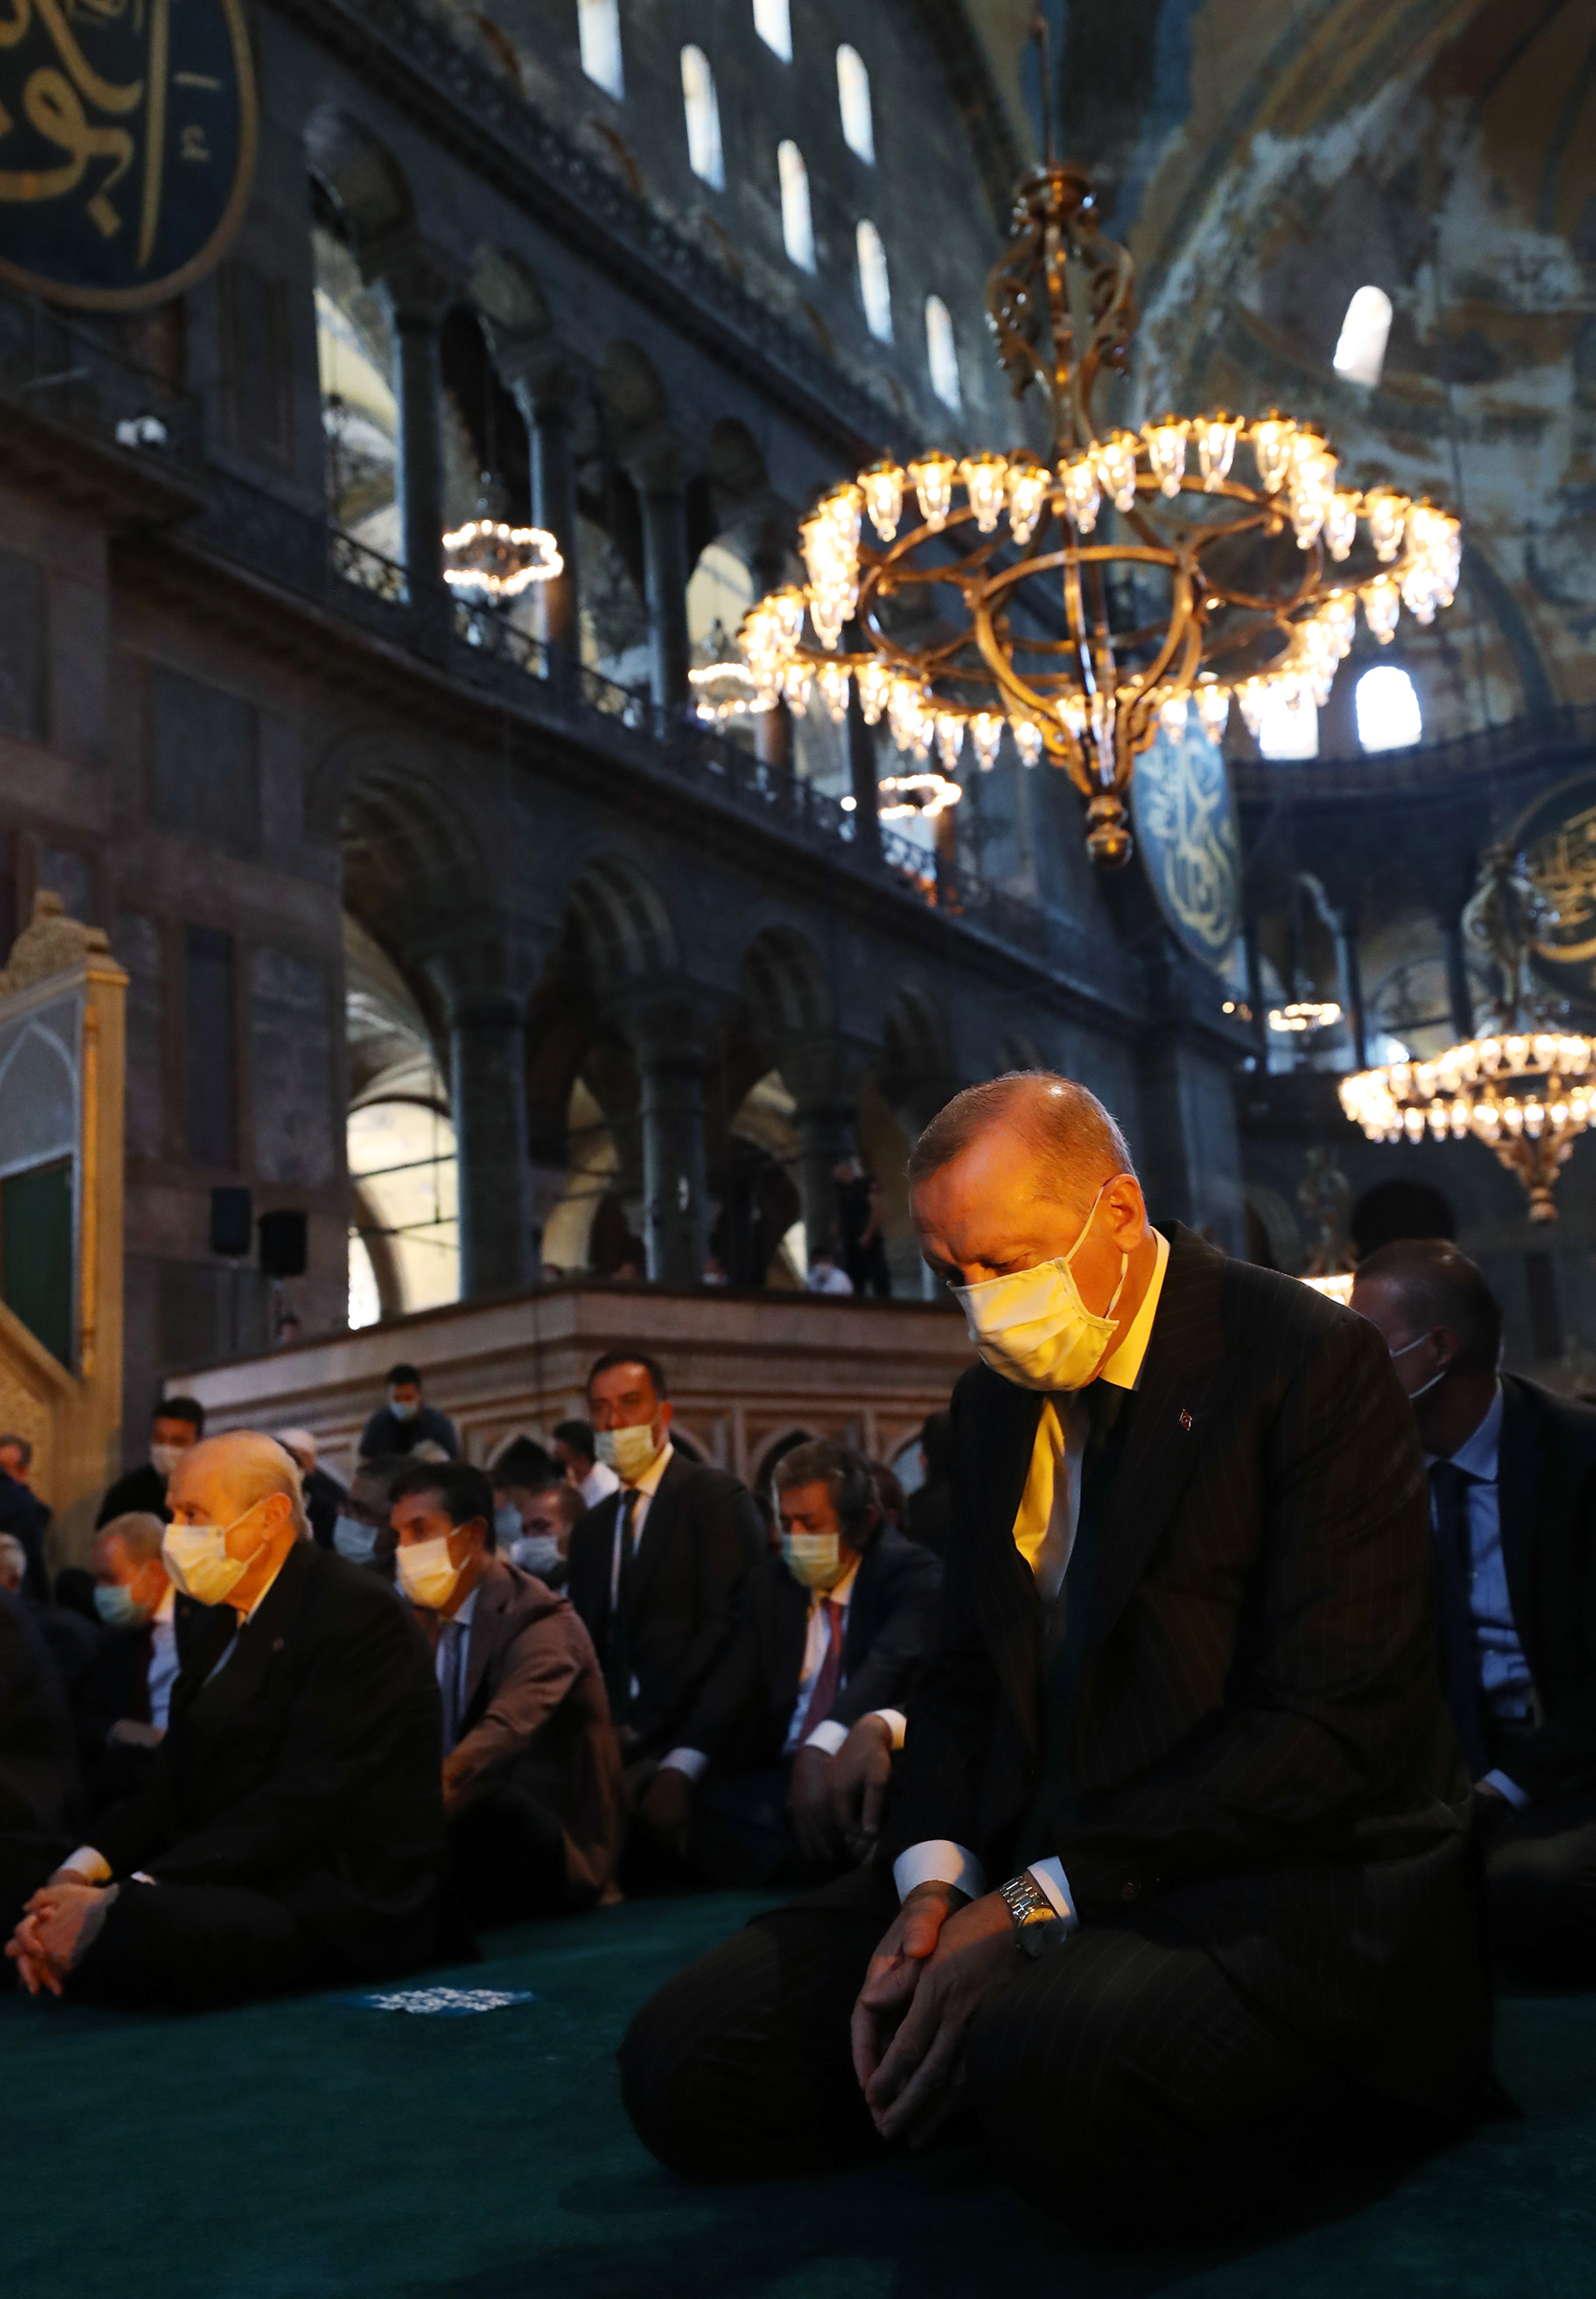 Turkey's President Recep Tayyip Erdogan (C) and invited guests attend Friday prayers at Hagia Sophia during the first official prayers after being reconverted into a mosque on July 24